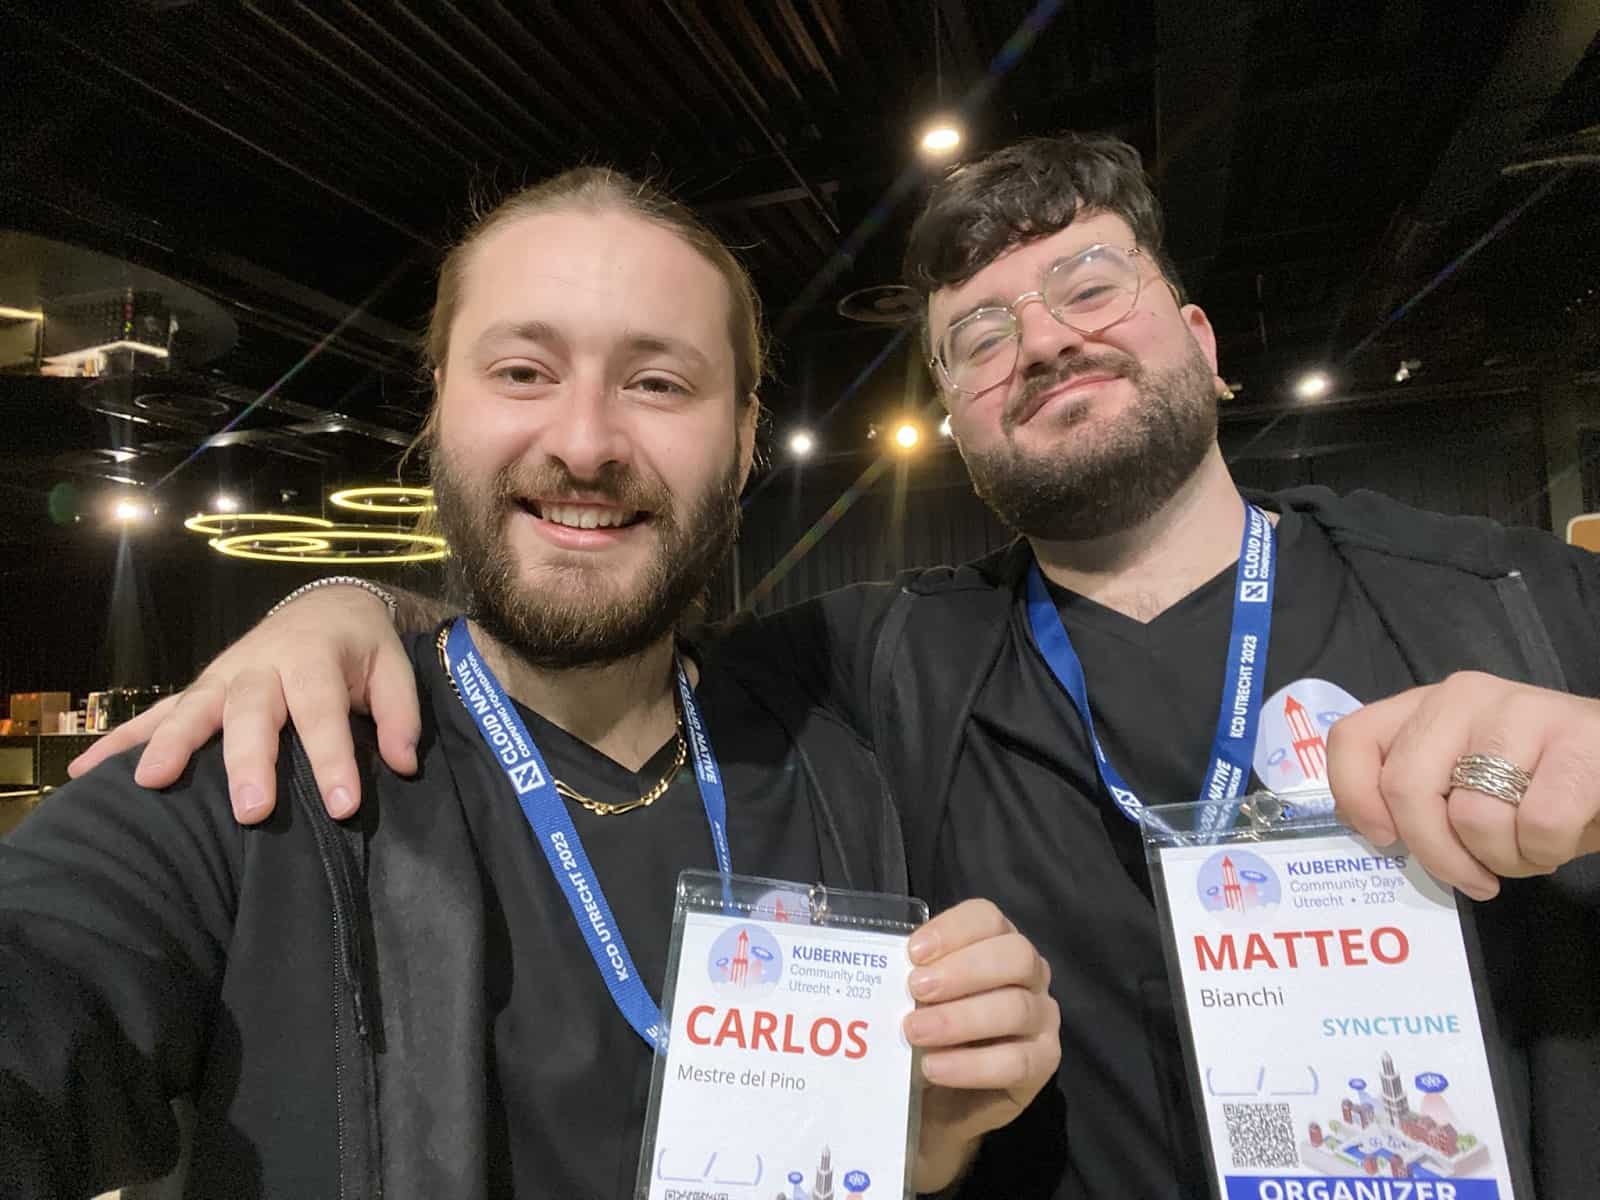 Carlos and Matteo showing their name tag to the camera